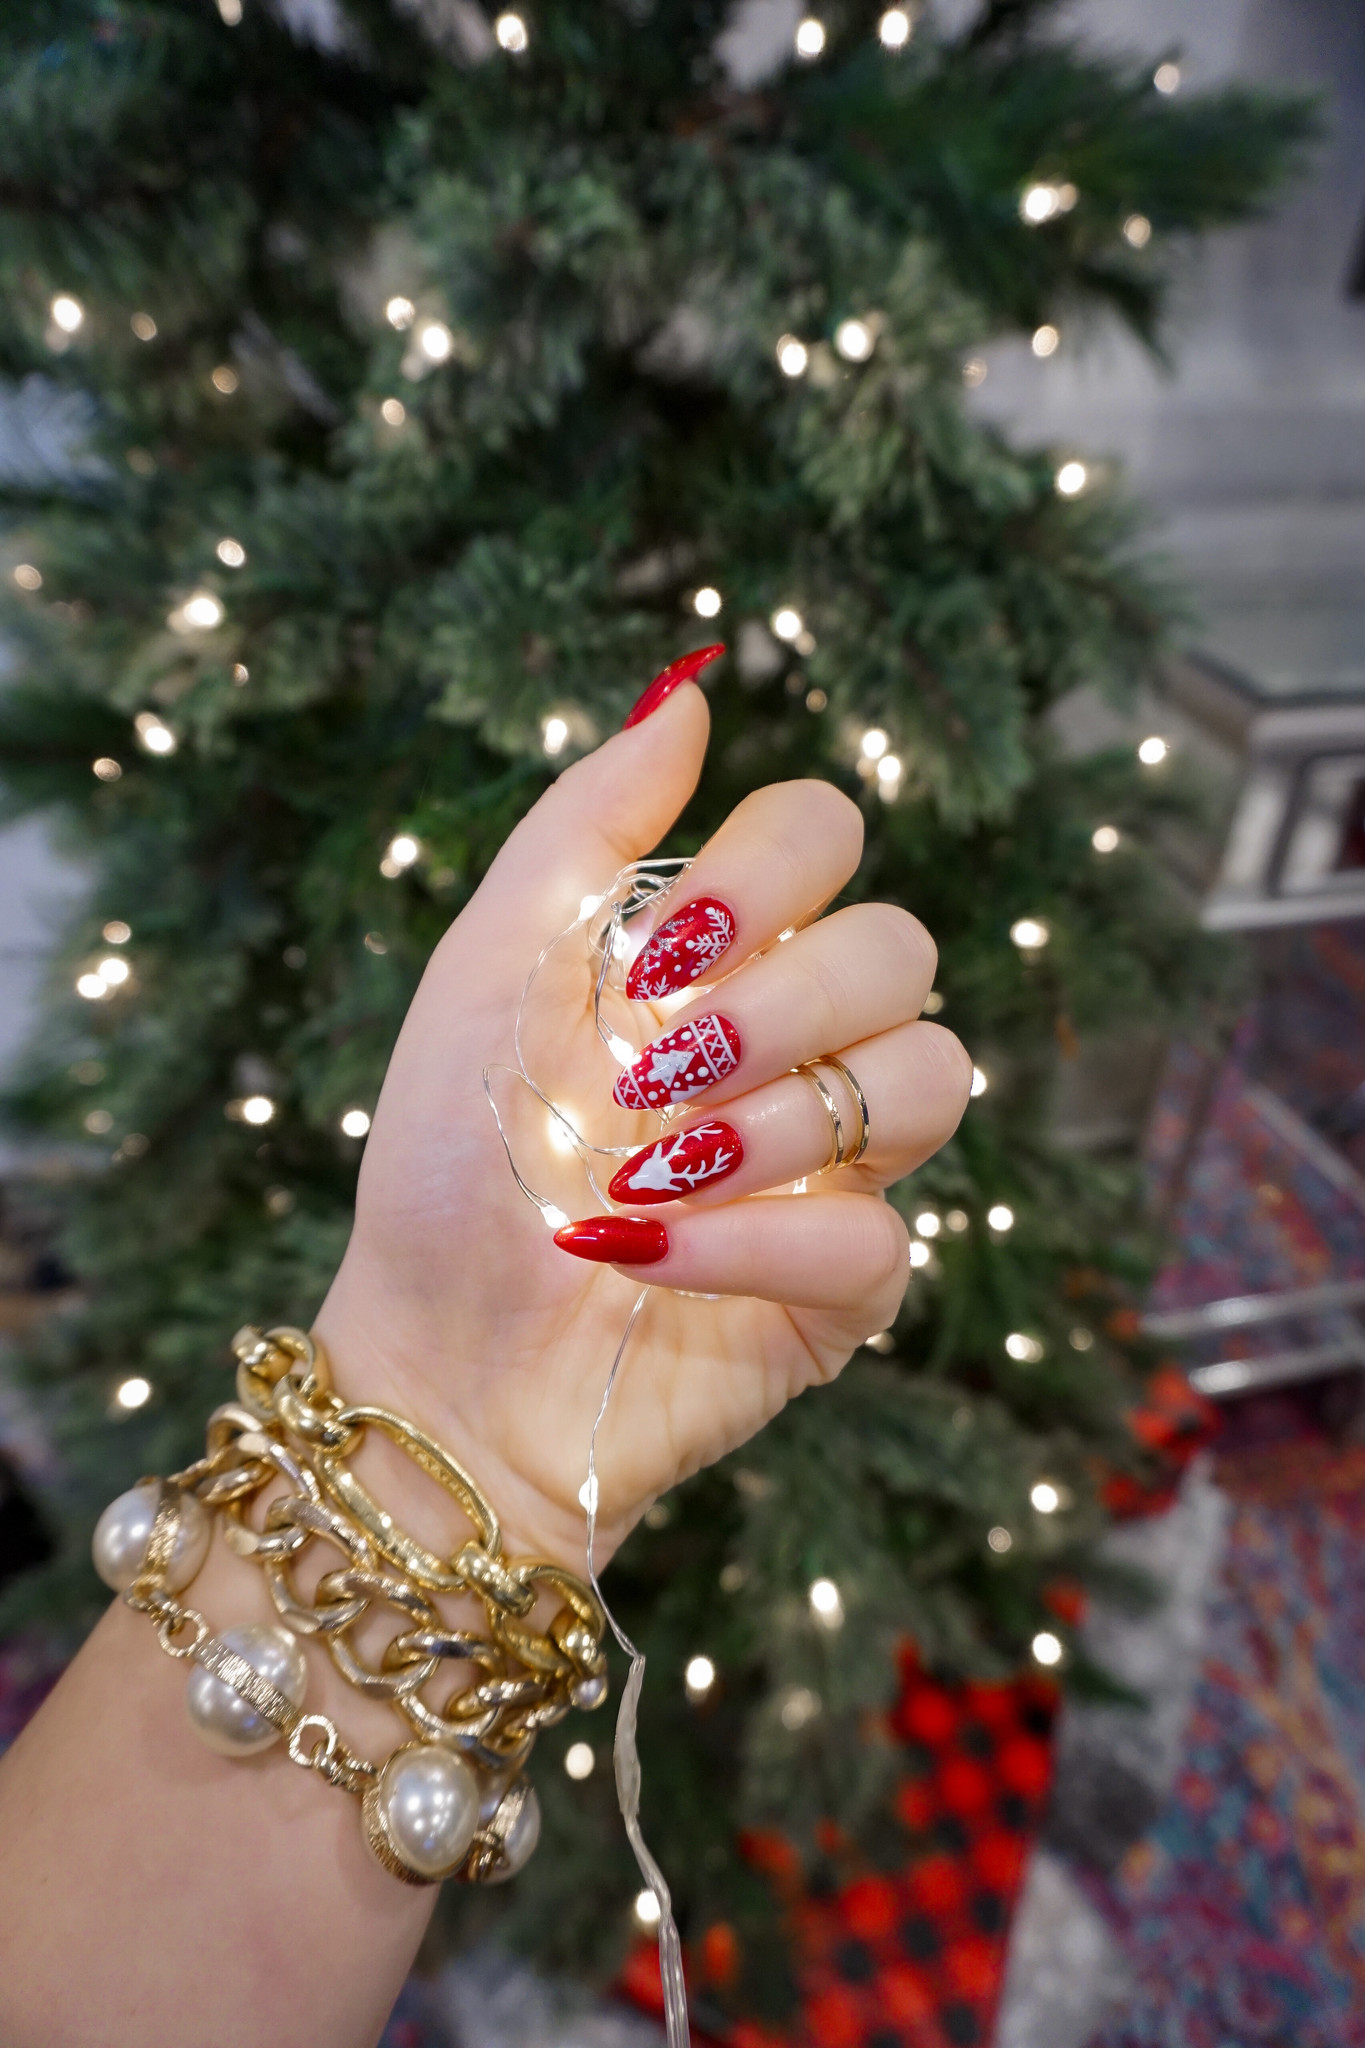 Red Christmas Sweater Nails | Holiday Manicures | Holiday Nails | Cutest Christmas Sweater Nails | Snowflake Nails | Reindeer Nail Art | Christmas Nail Ideas | December Nails | Christmas Lights | Almond Nails 